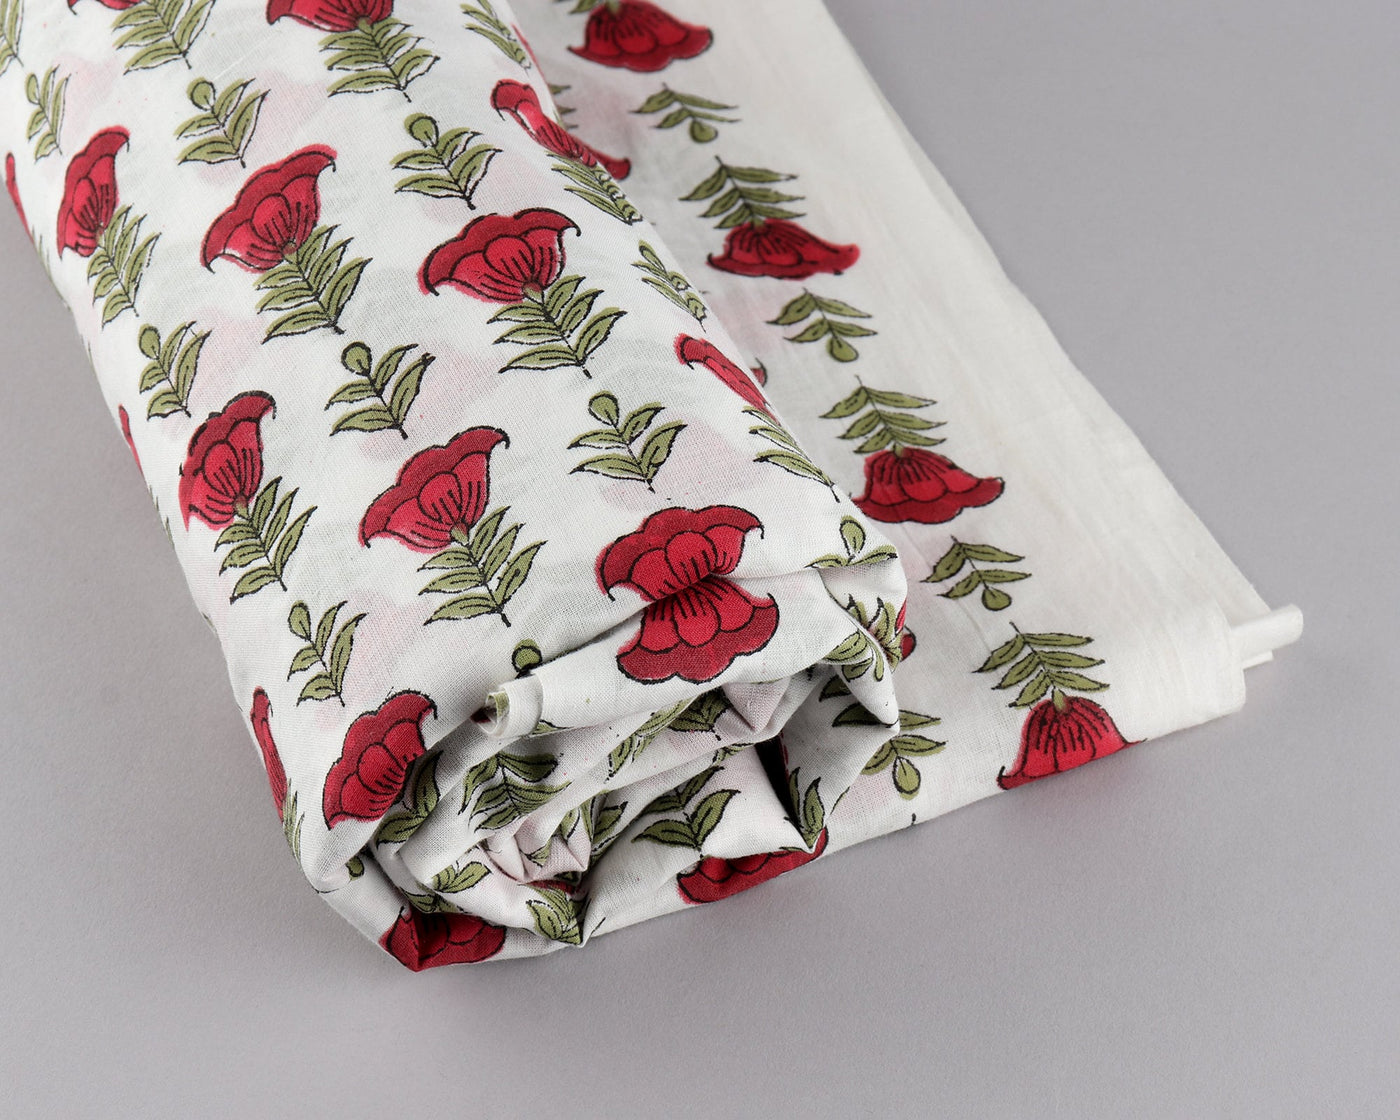 Fabricrush Apple and Cherry Red, Olive Green Indian Floral Hand Block Printed Pure Cotton Cloth, Fabric by the Yard, Women's Clothing Curtains Pillows